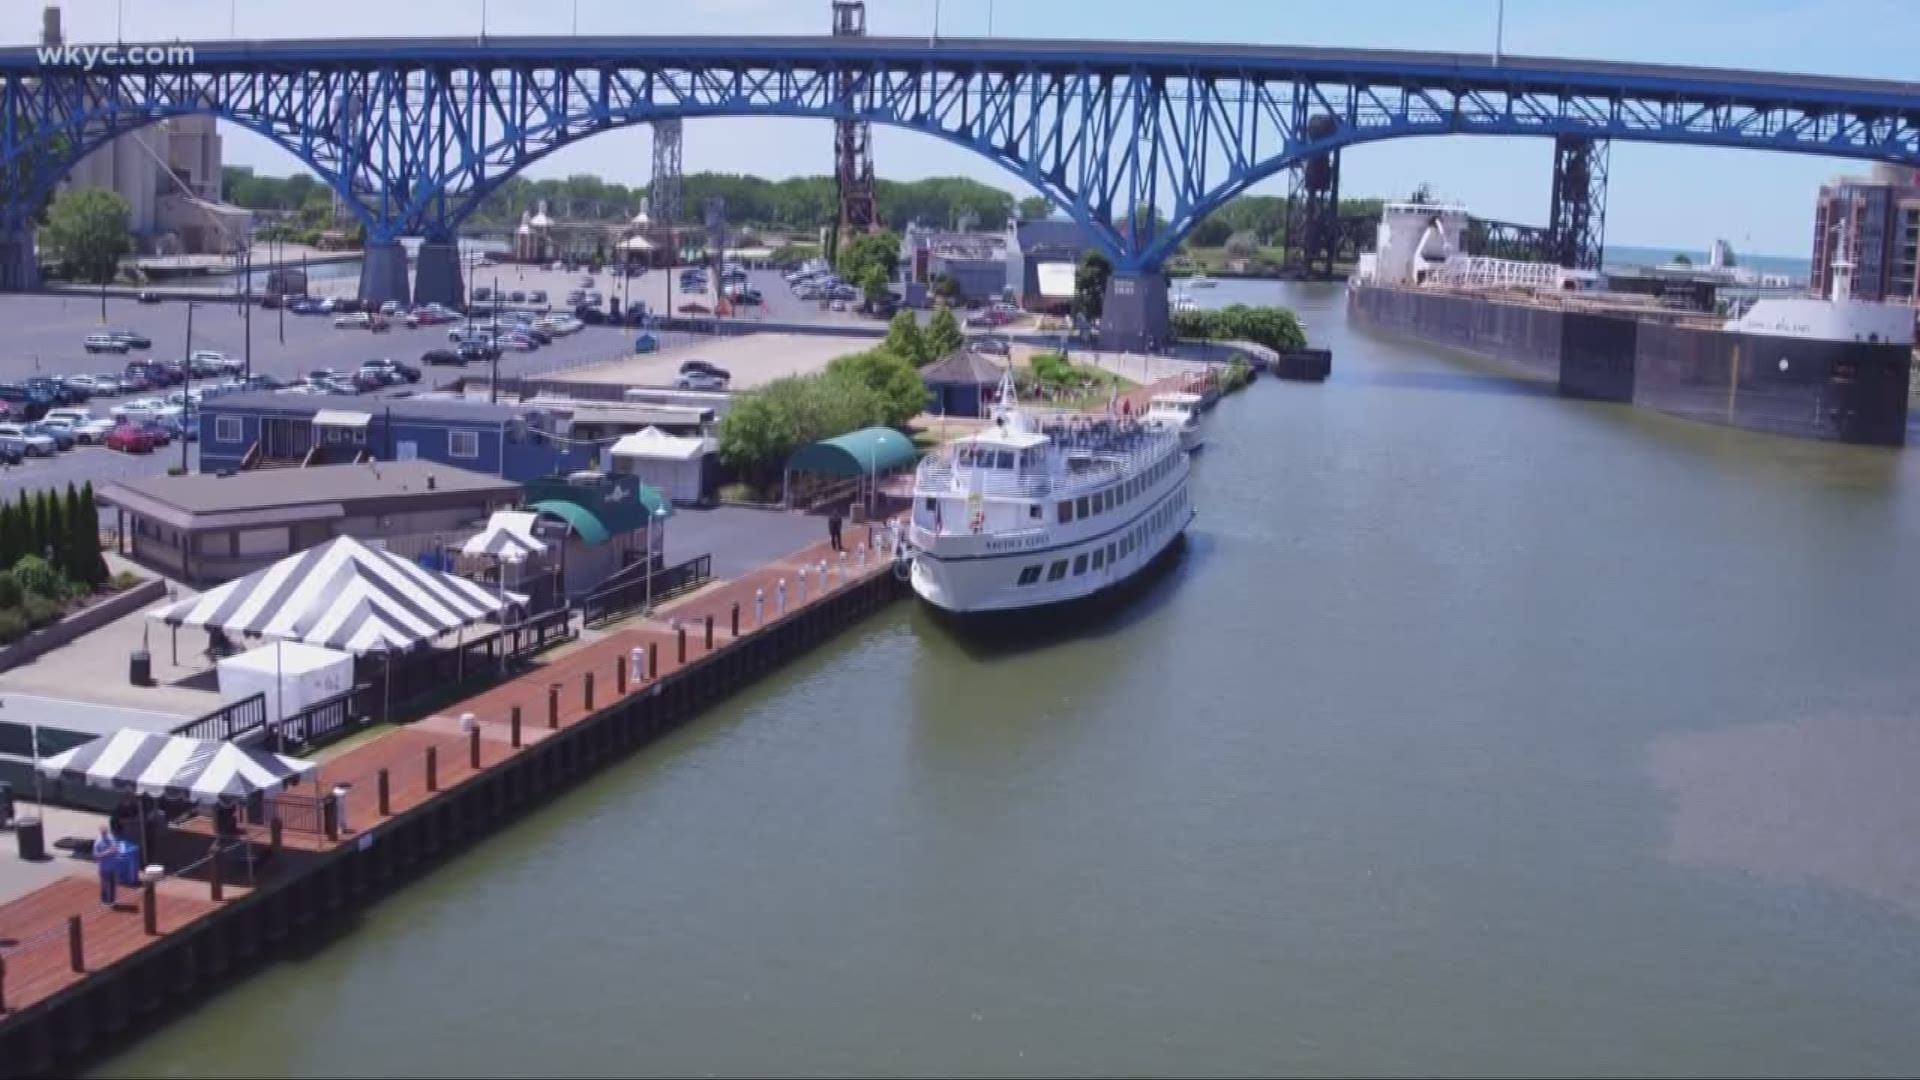 Cruising to Cleveland? Yes, it's a thing